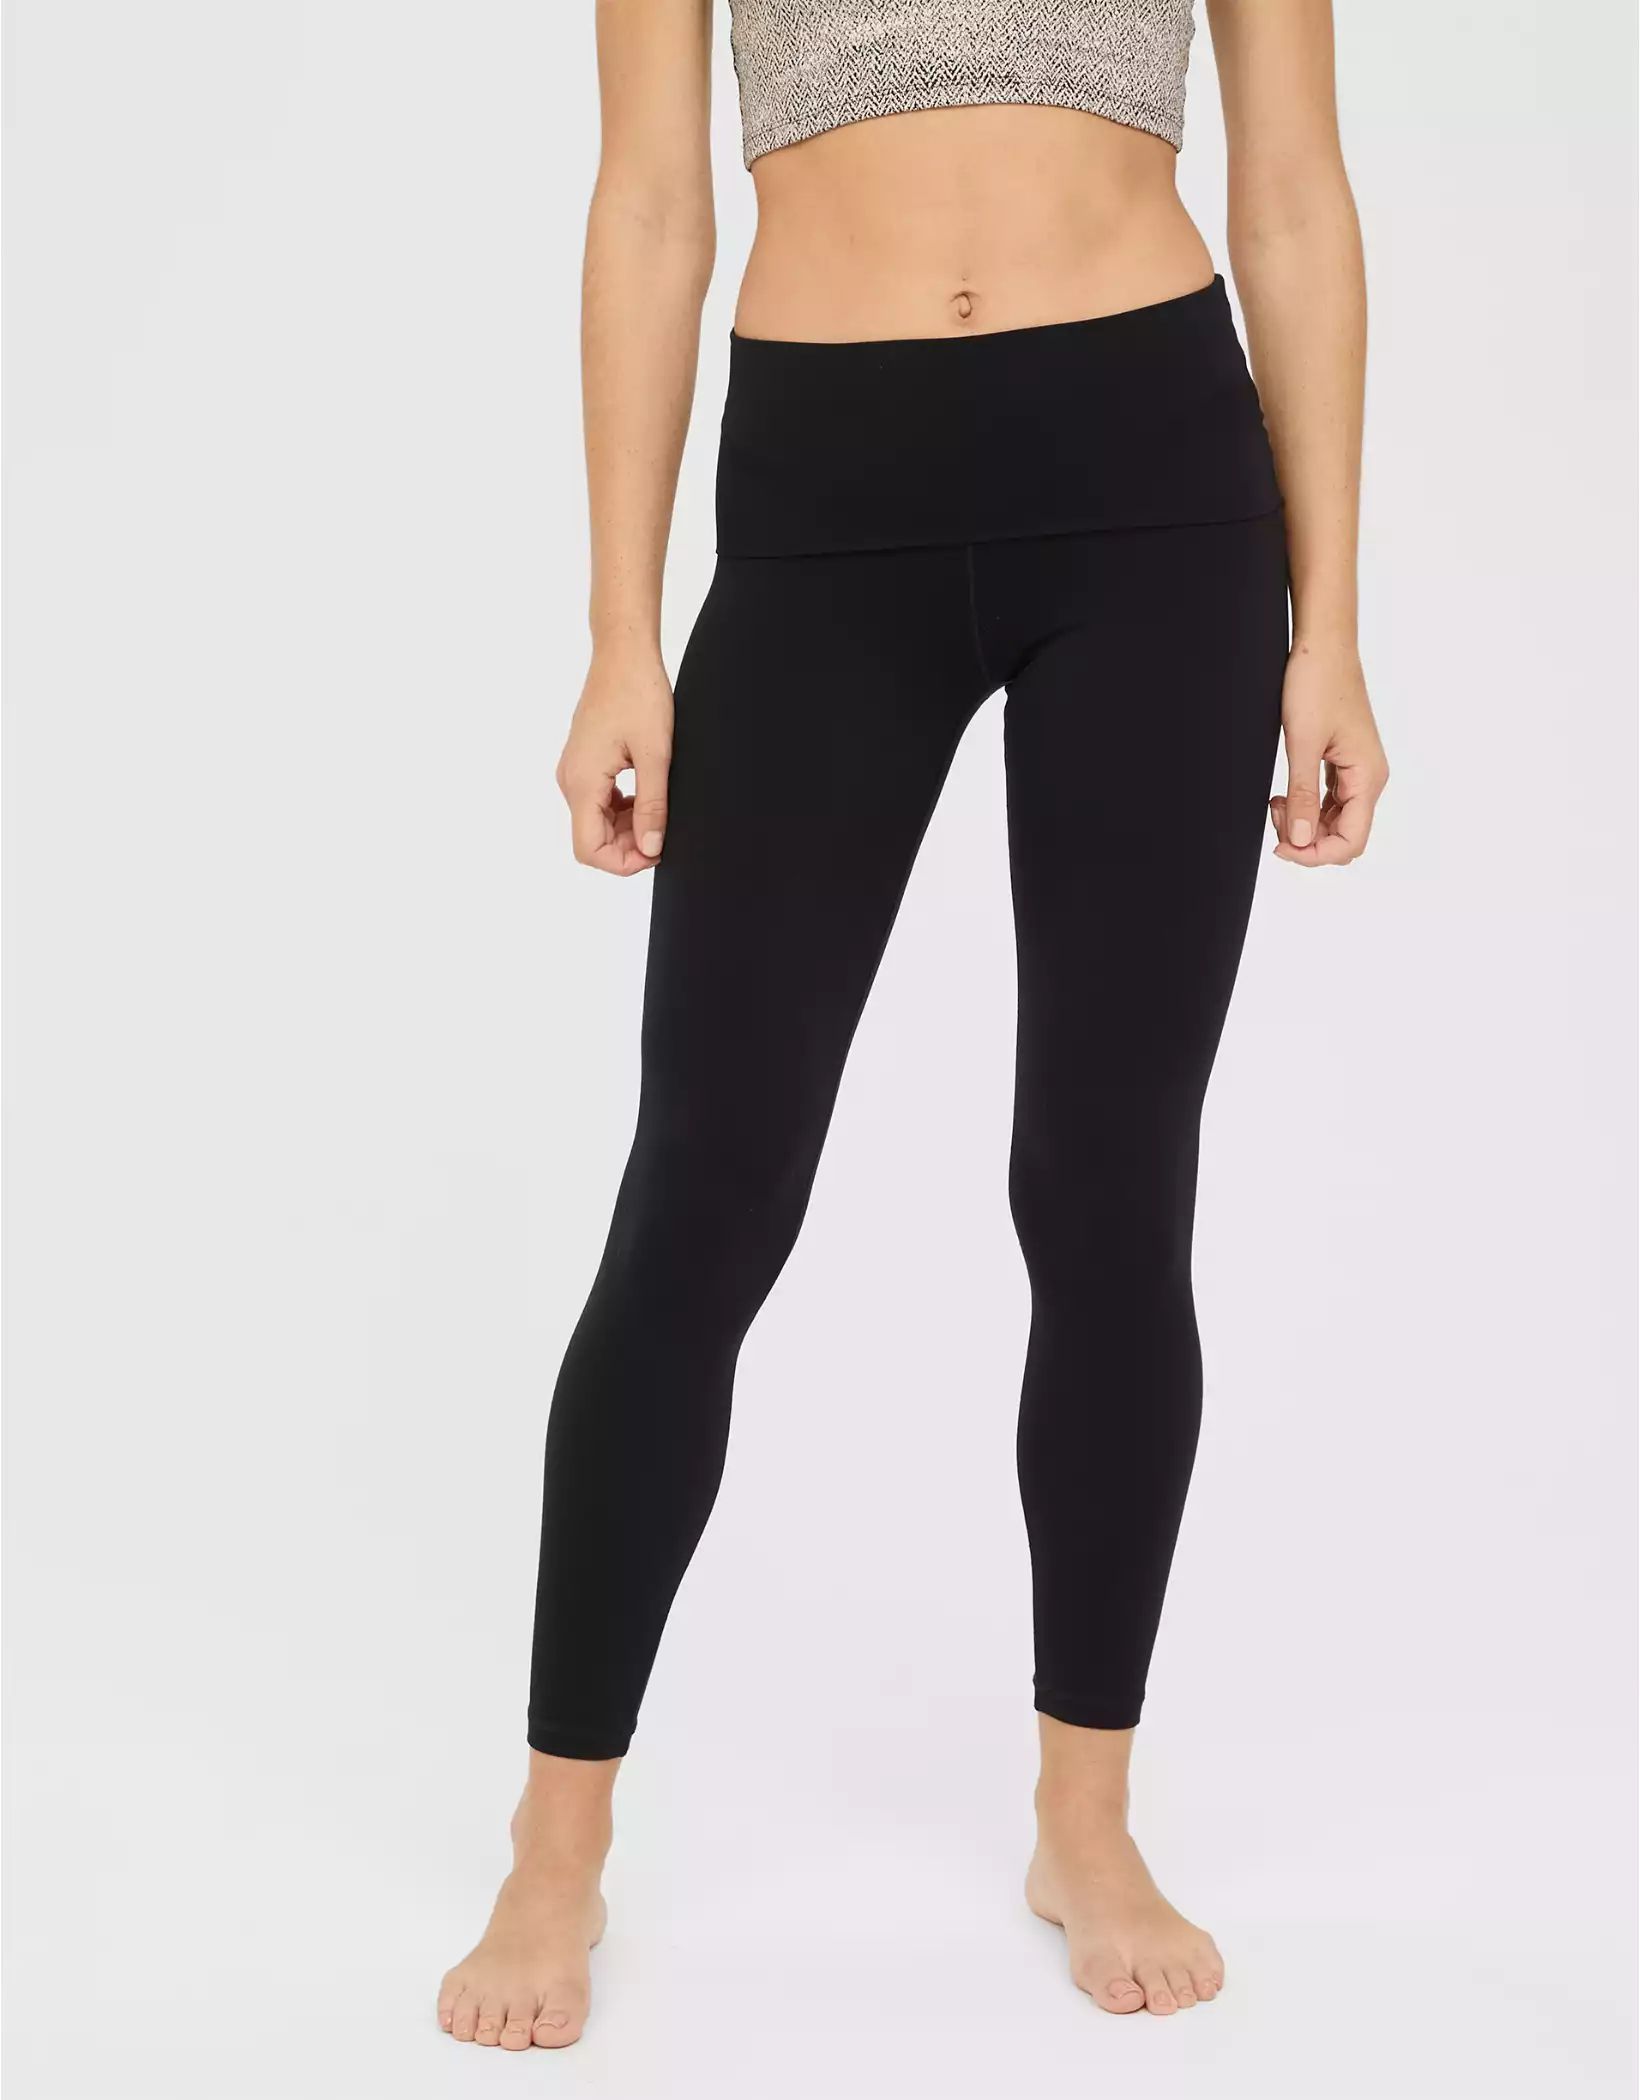 OFFLINE By Aerie Real Me High Waisted Foldover Legging | Aerie